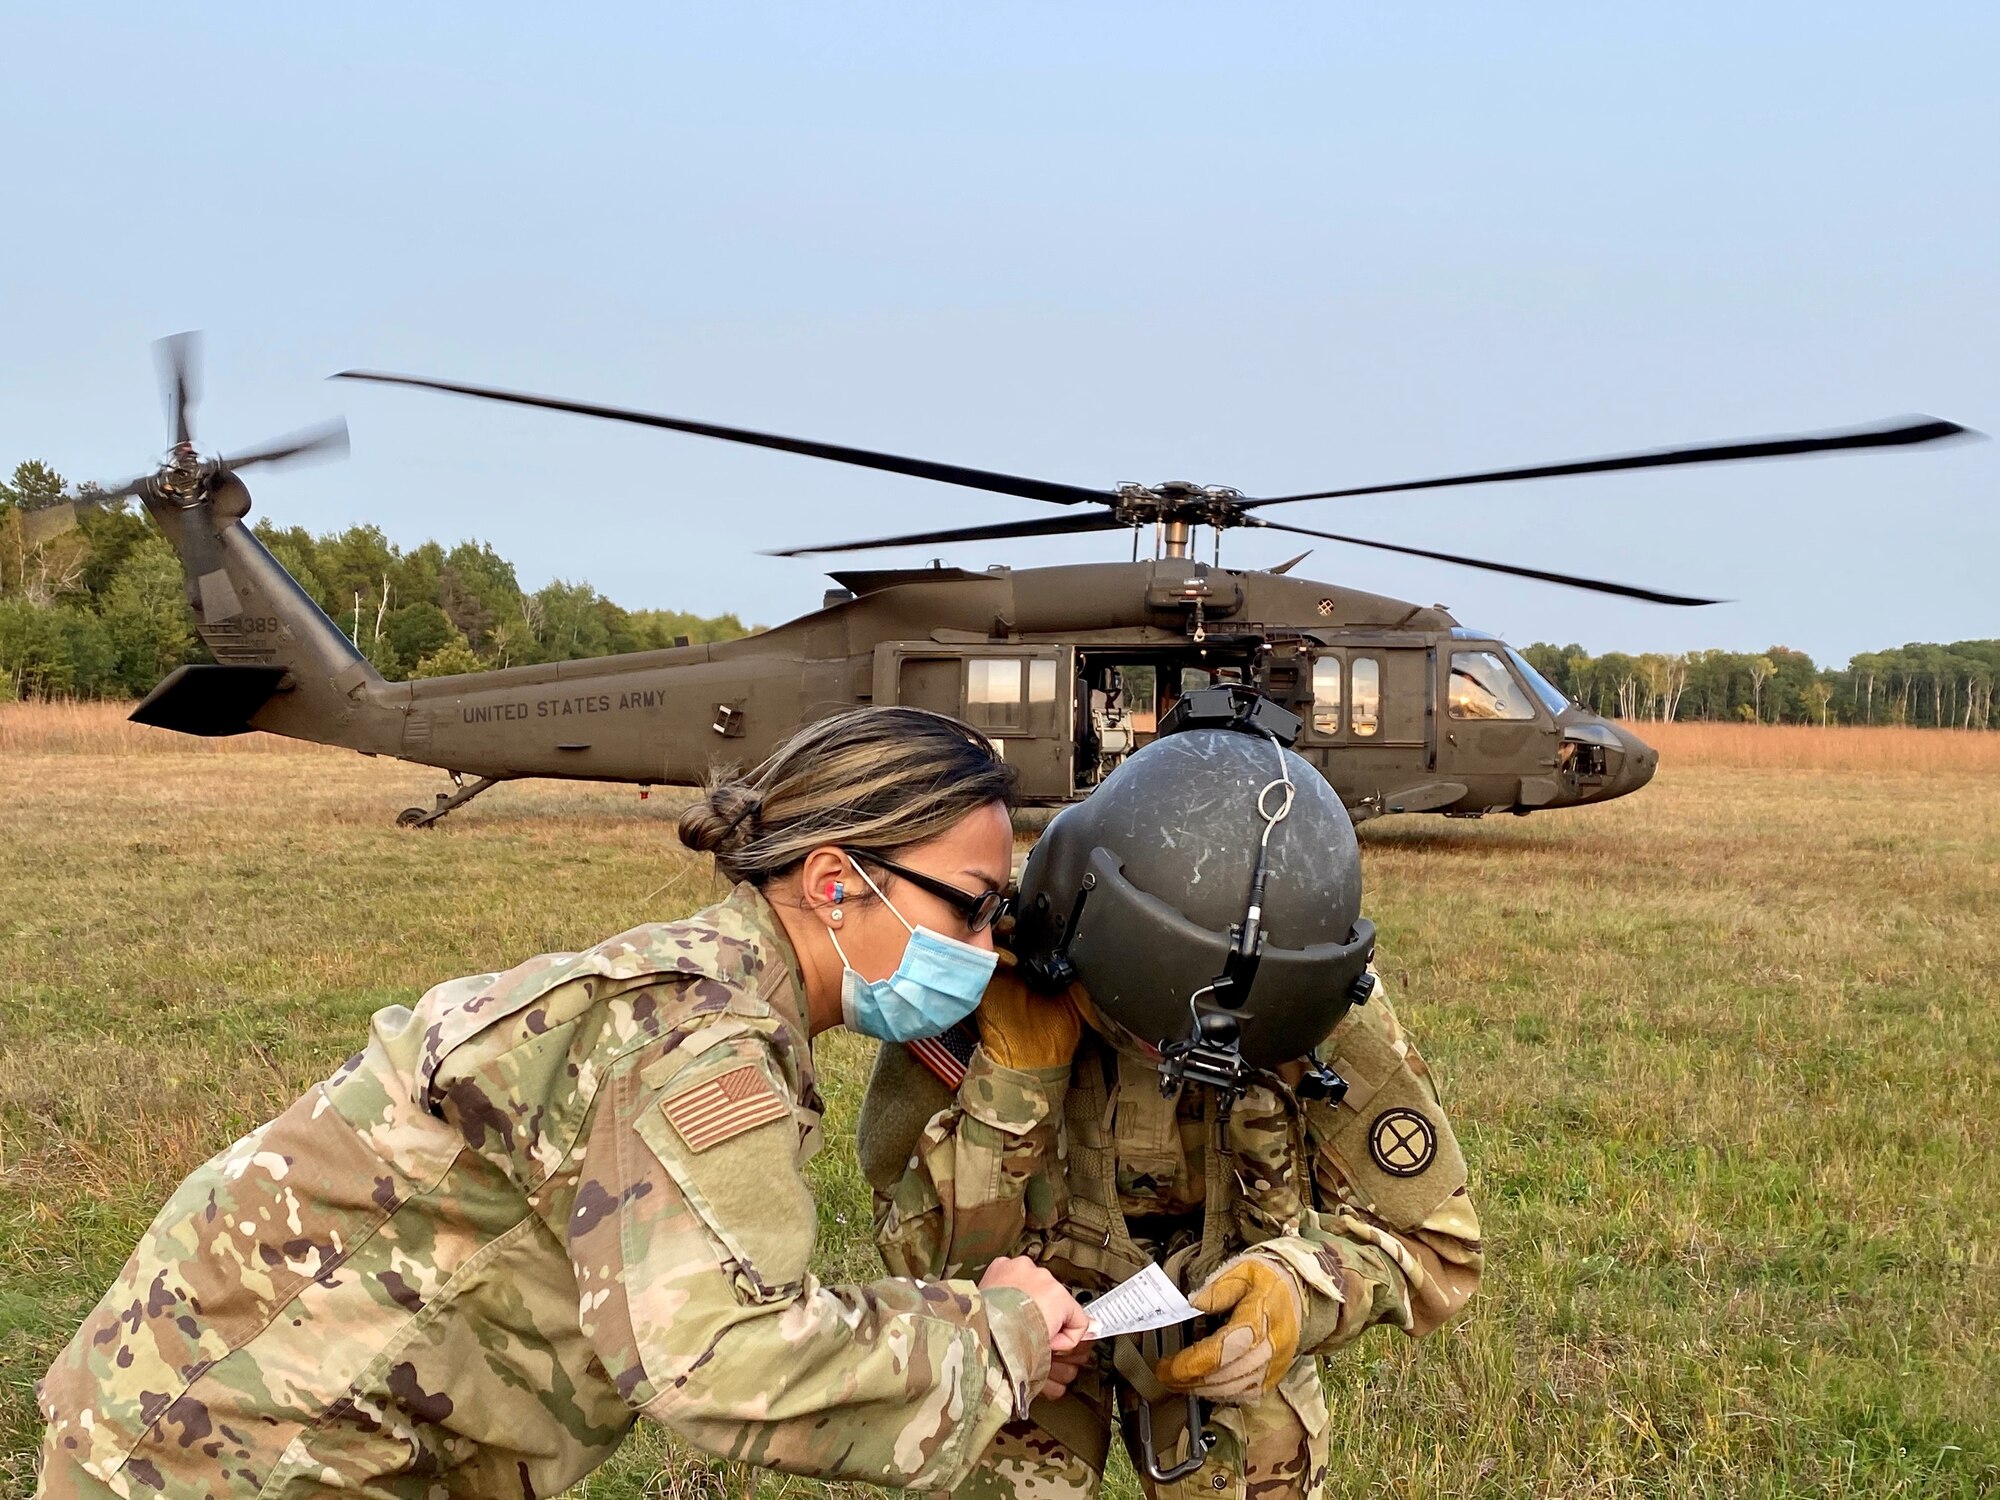 An Aerospace Medical Technician with the 148th Fighter Wing, Minnesota Air National Guard, communicates with a Critical Care Flight Paramedic assigned to the 2-211 General Aviation Support Battalion, Minnesota Army National Guard, during medical evacuation training at Camp Ripley Training Center, Minnesota on Saturday, September 20, 2020.